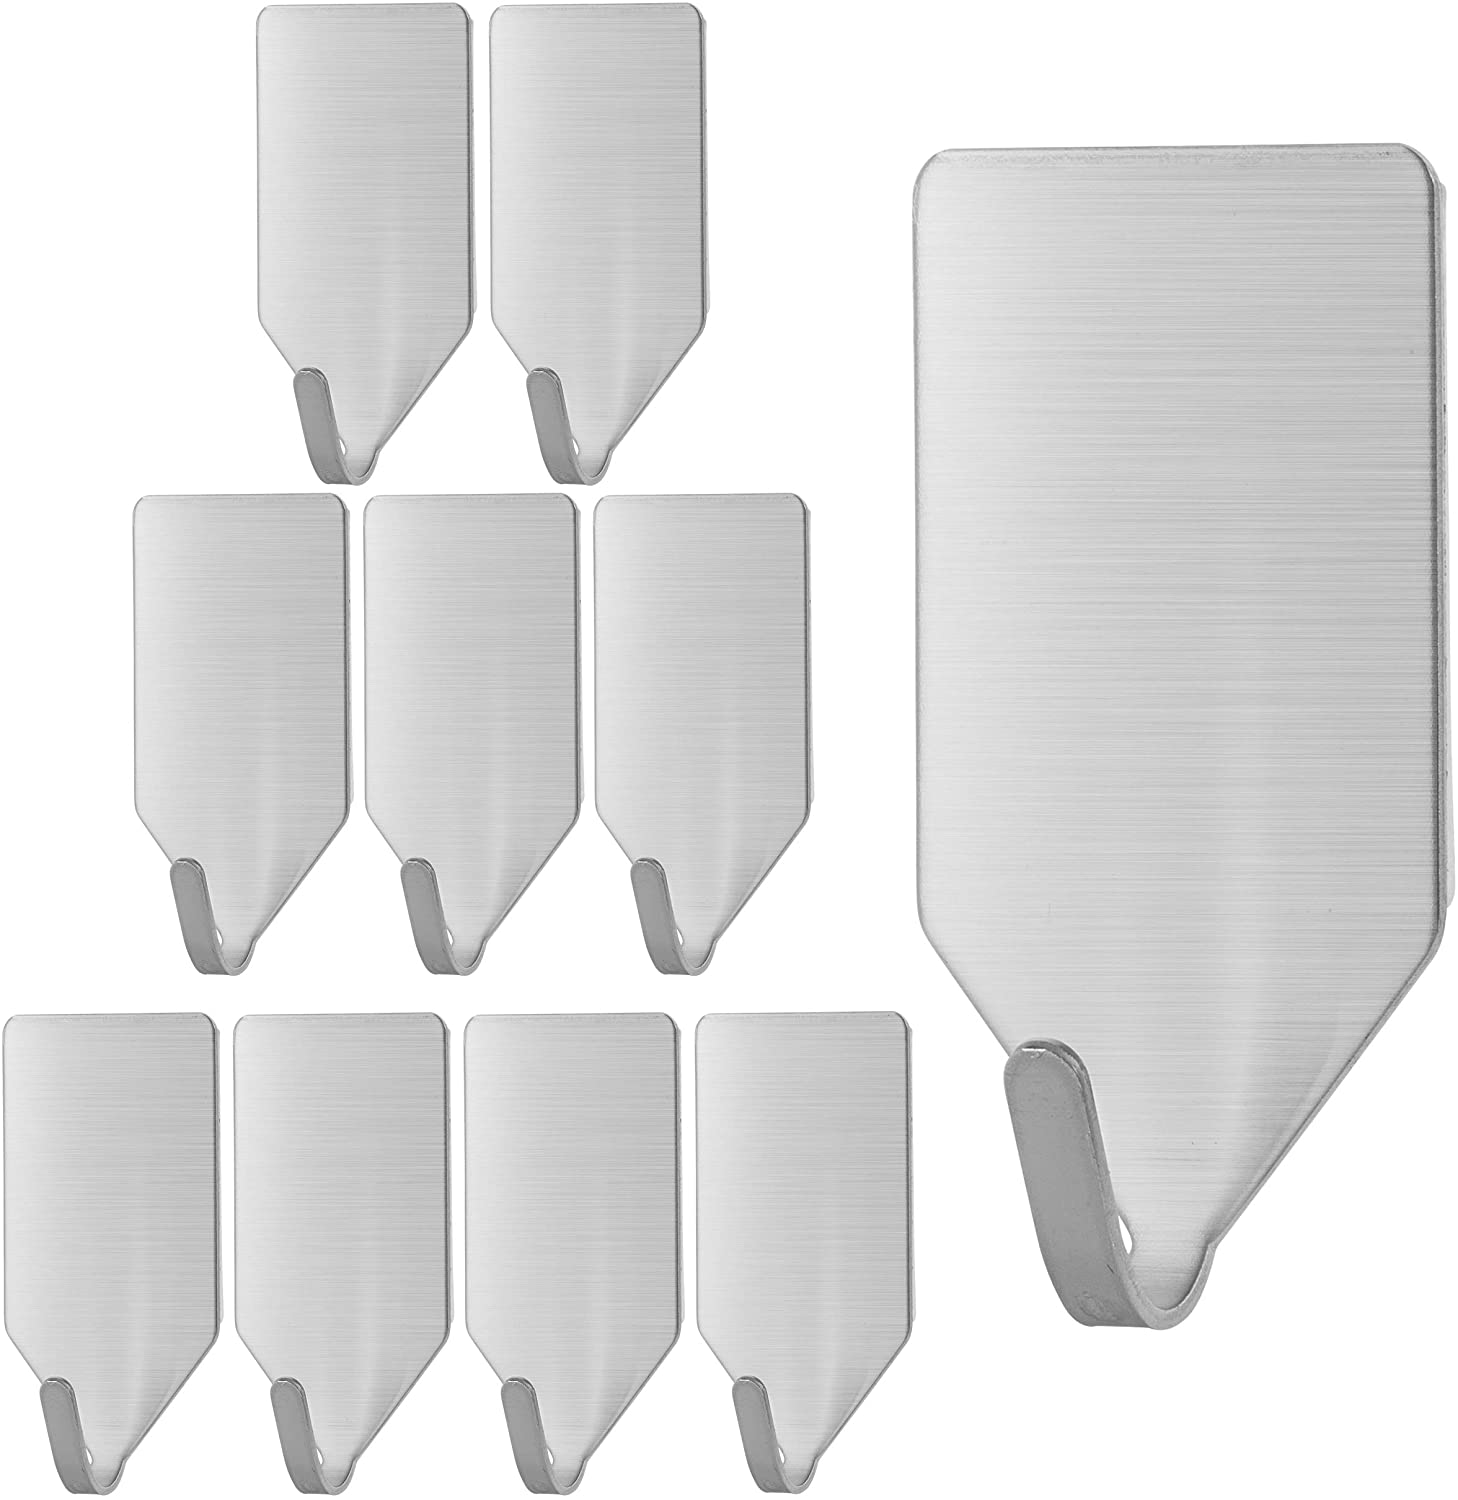 UNCO- Small Adhesive Hooks, 10 Pack, Stainless Steel, Hooks for